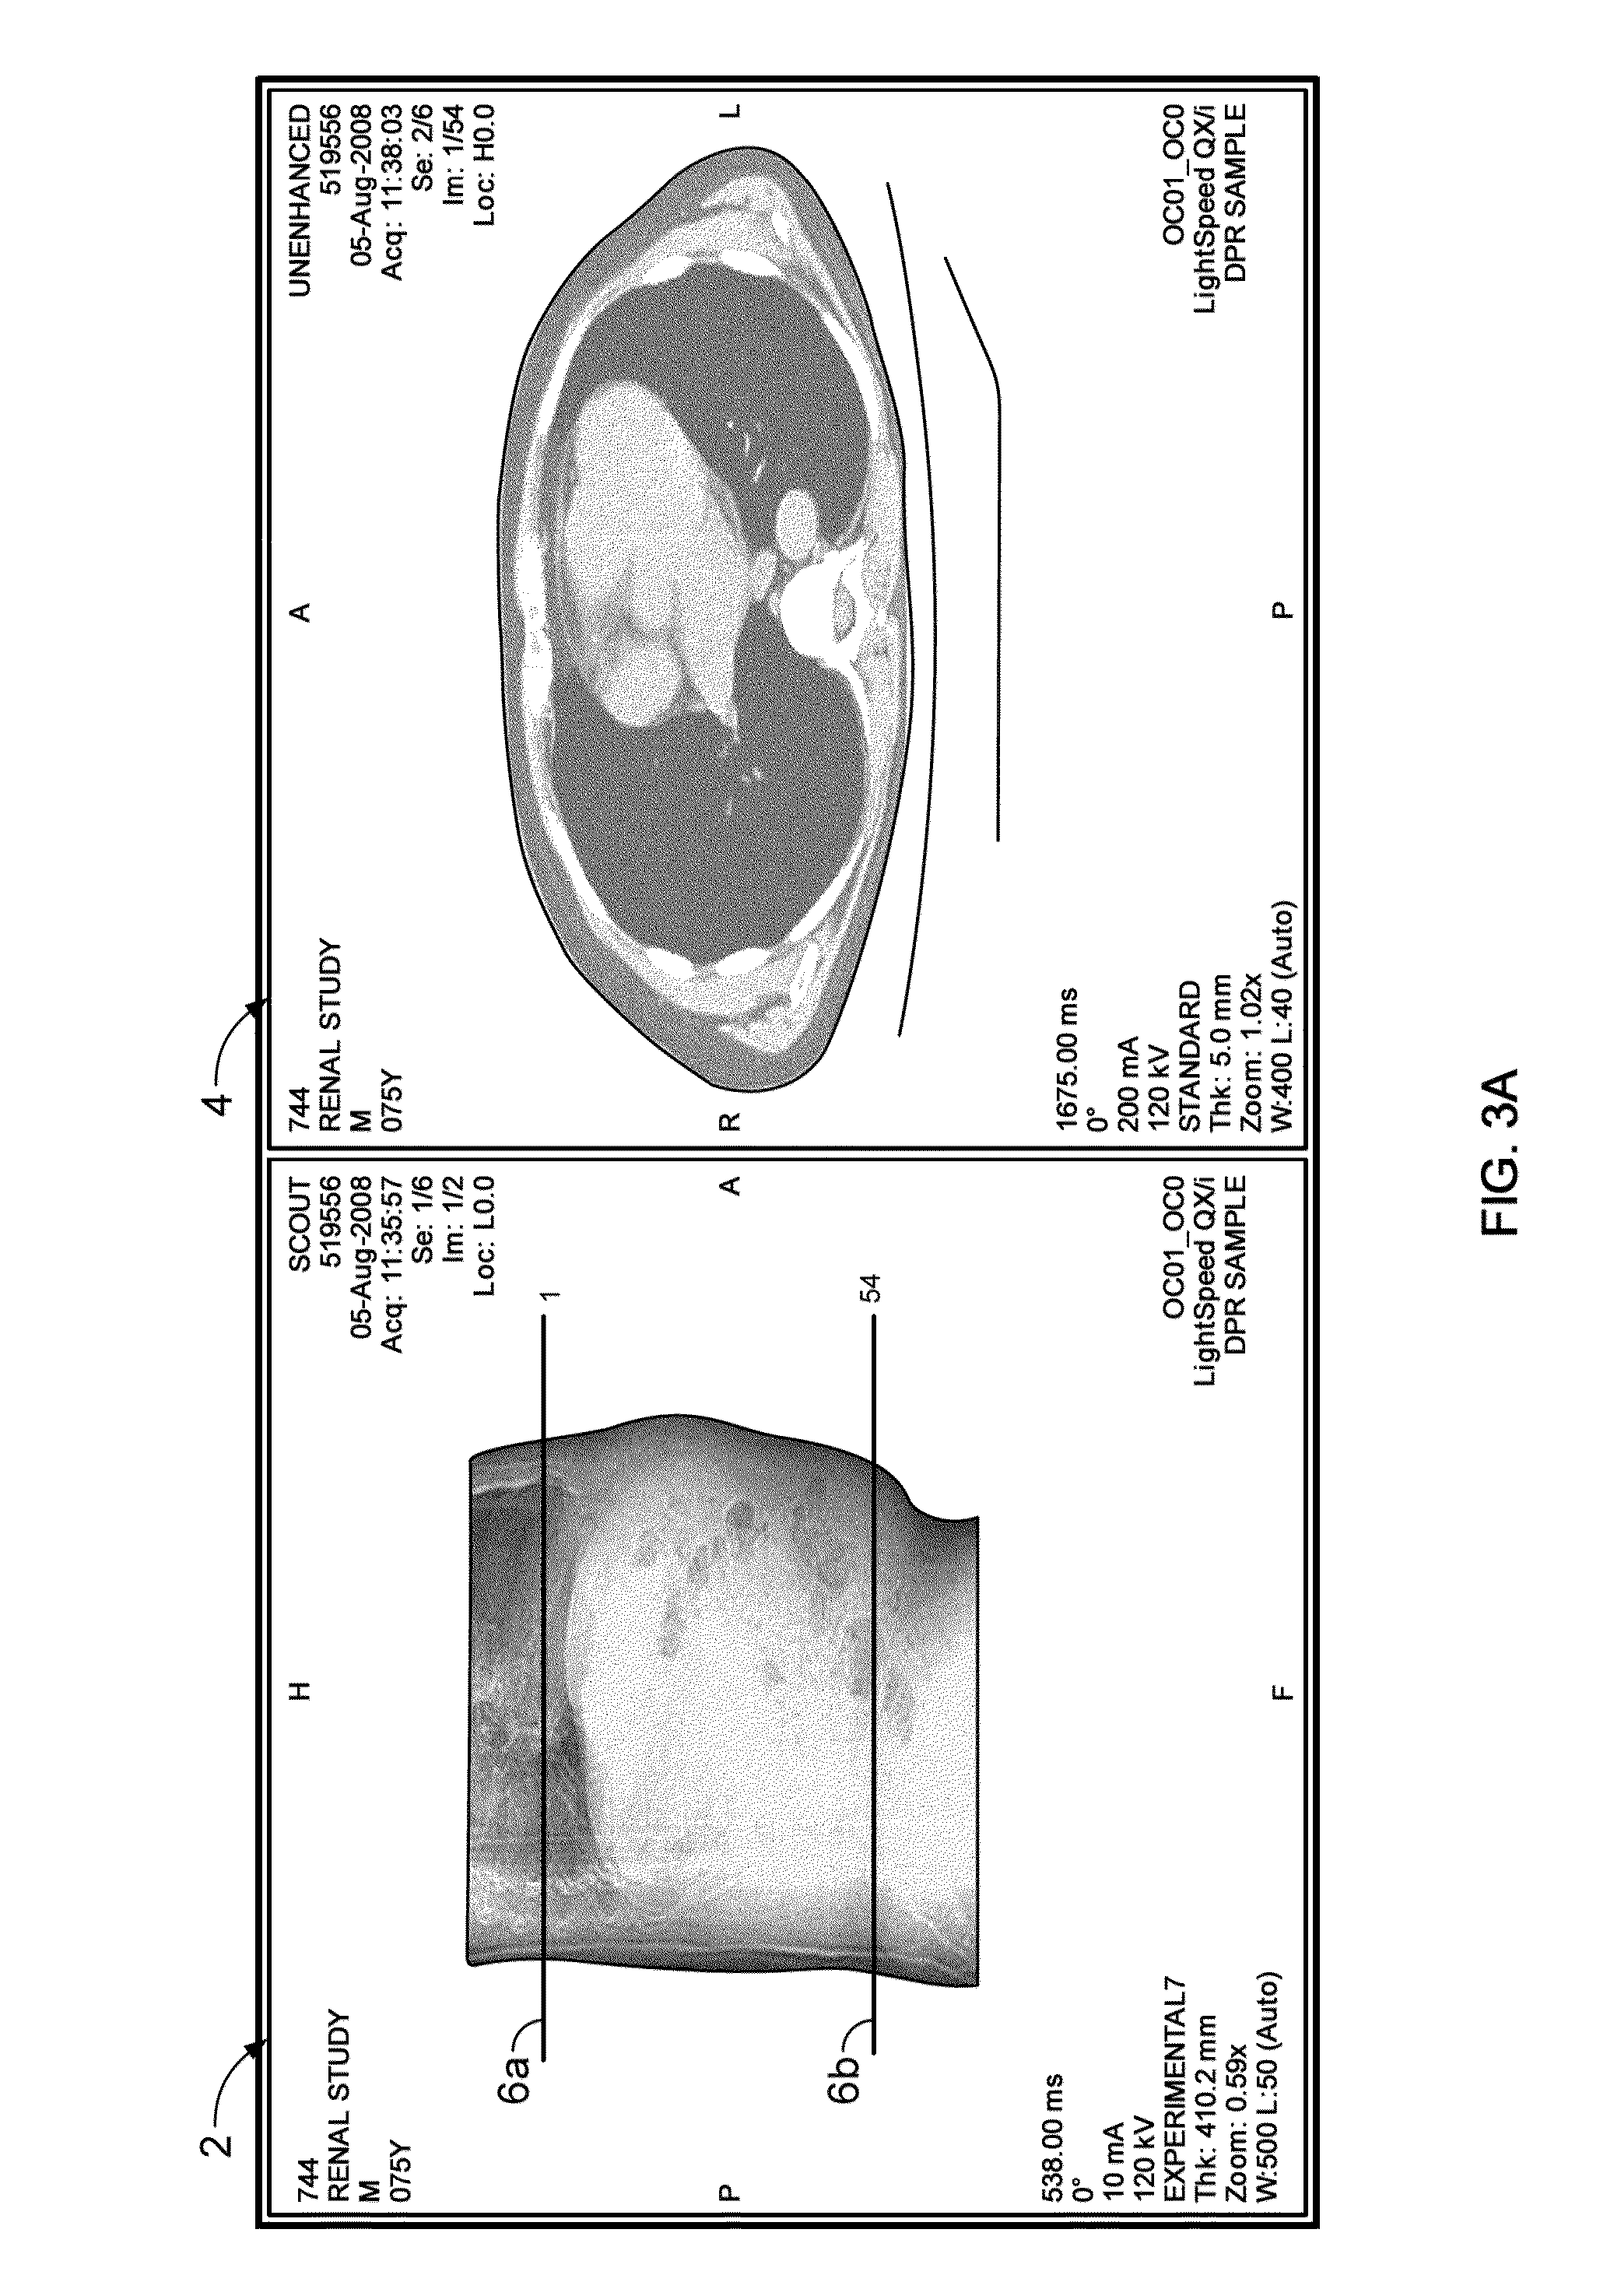 Systems and methods for efficient imaging